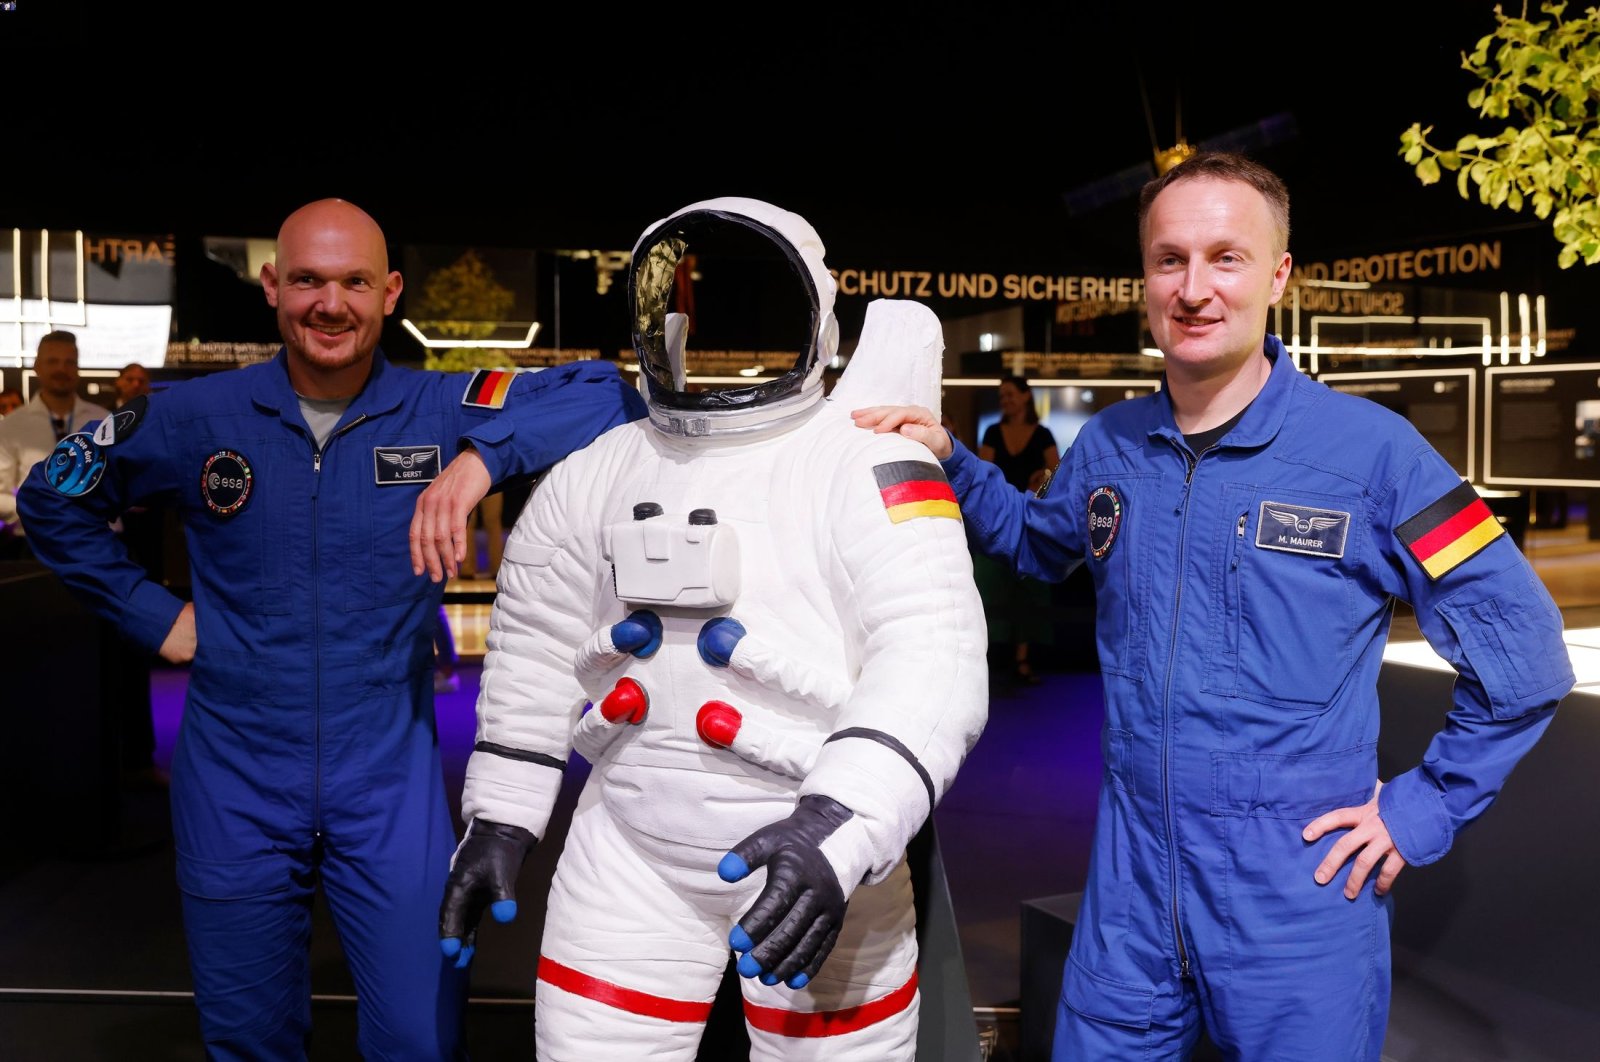 ESA Astronauts Alexander Gerst (L) and Matthias Maurer pose on the first day of the ILA Berlin 2022 air show, in Schoenefeld, Germany, June 22, 2022. (Getty Images)